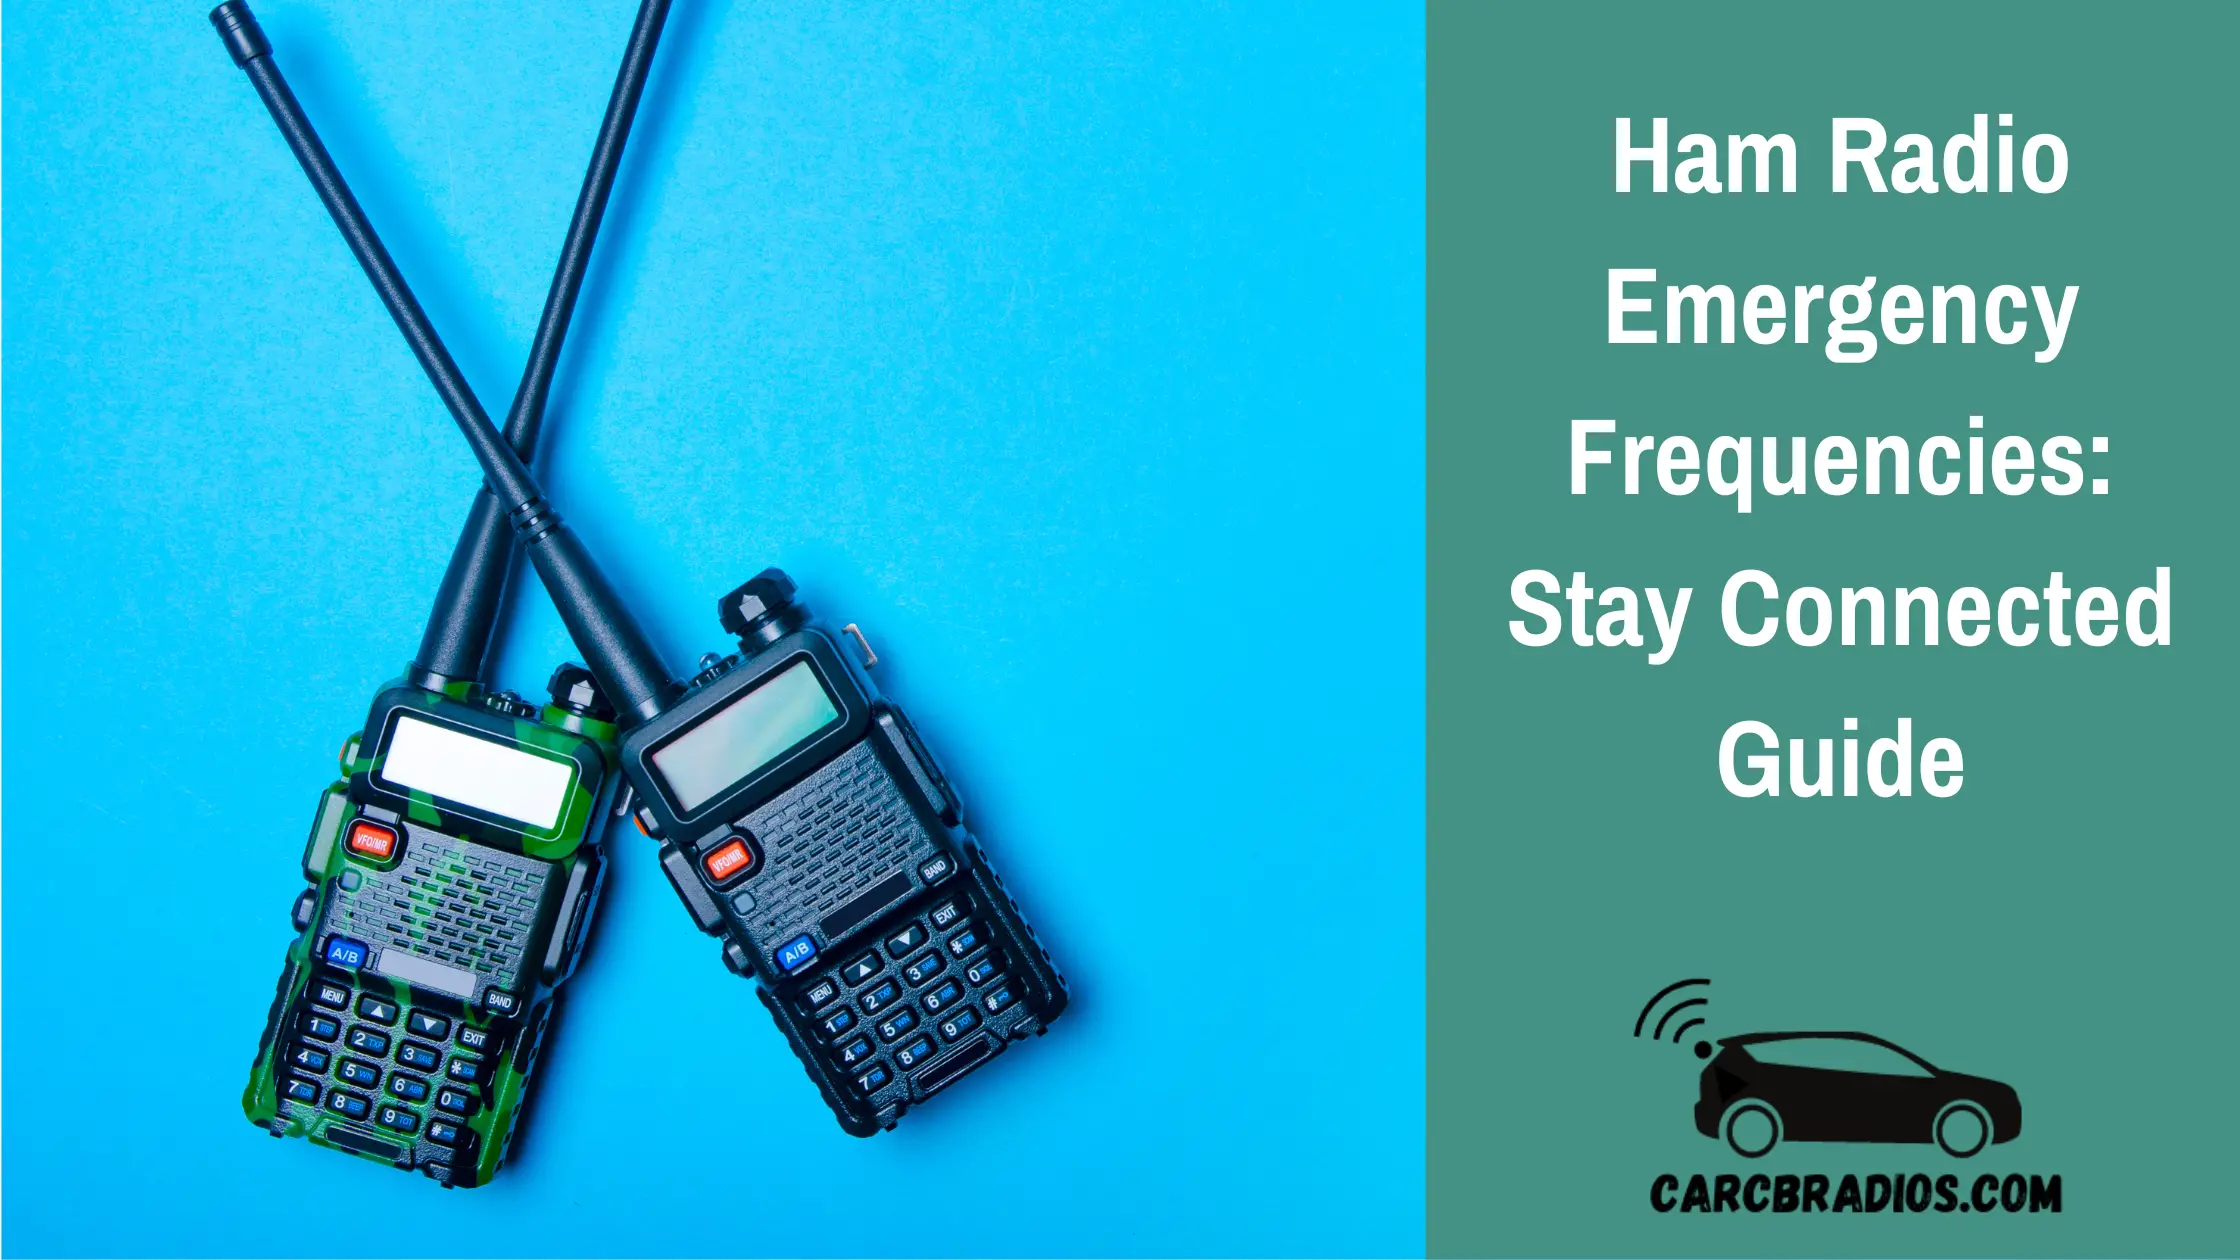 Ham Radio Emergency Frequencies: Stay Connected Guide